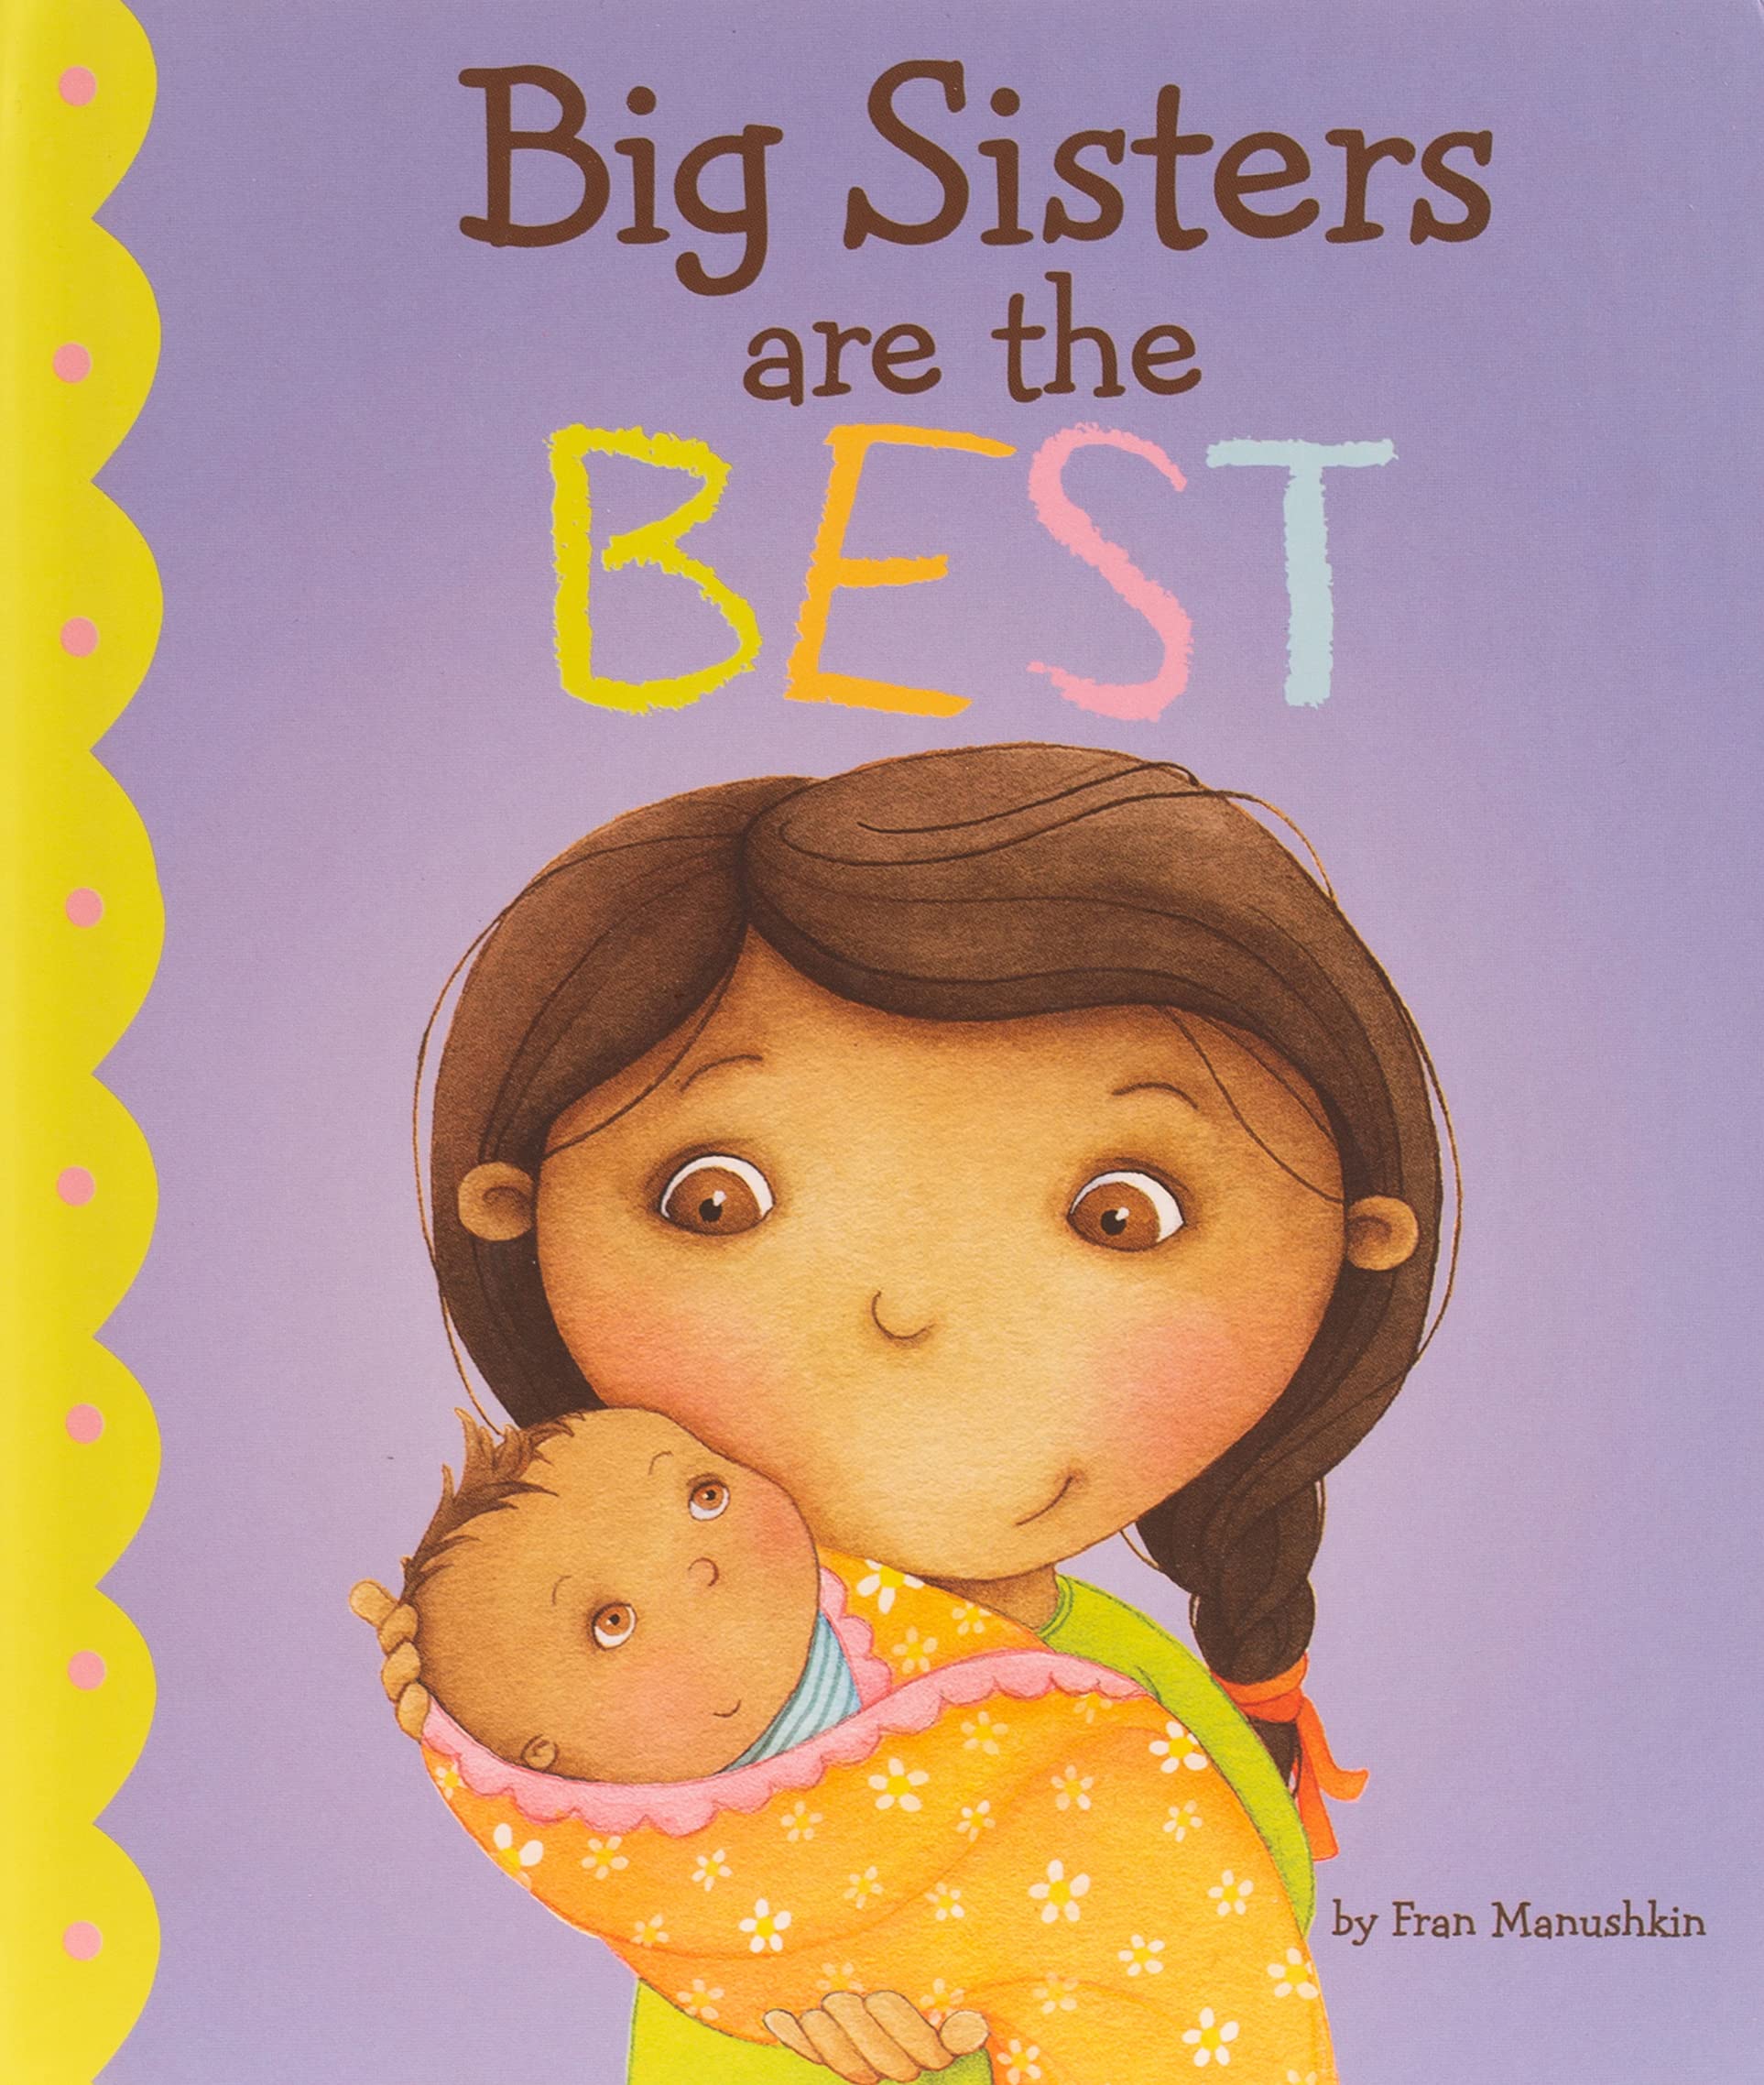 Big sister. Little sister книги английские. The best Издательство. A Gift book to my sister.